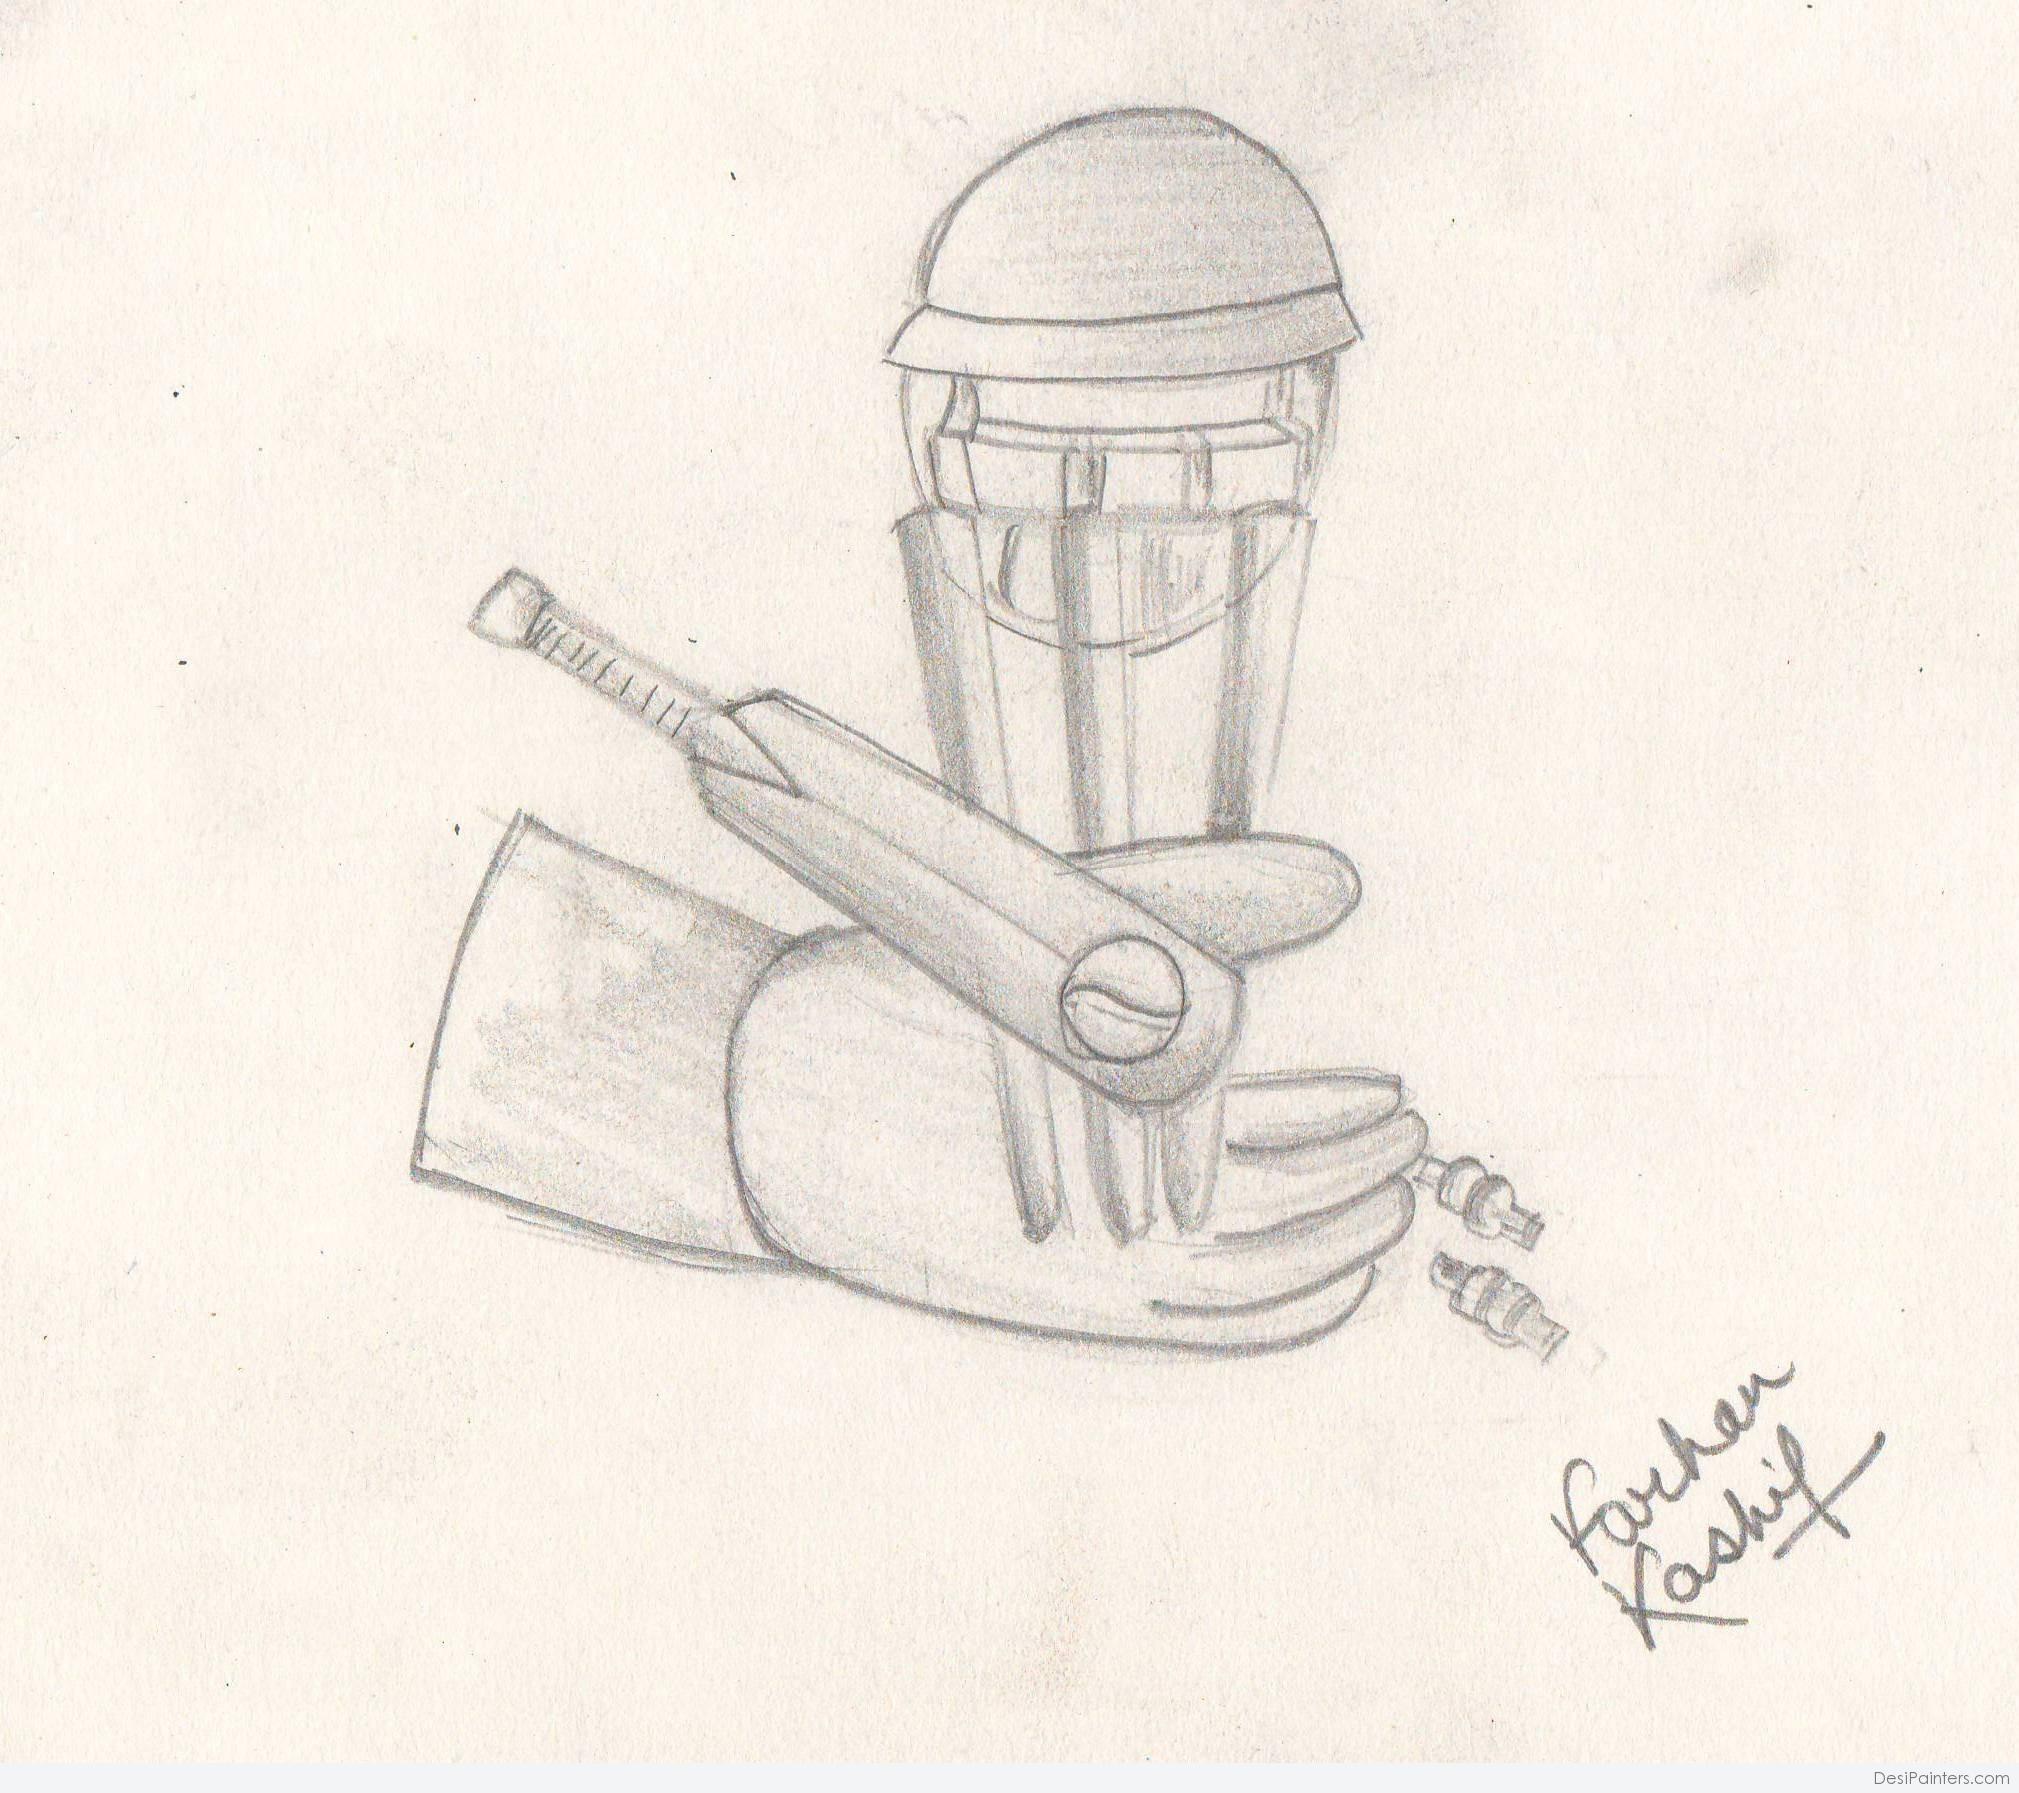 The God of Cricket” – My Pencil Strokes – Instagrammed